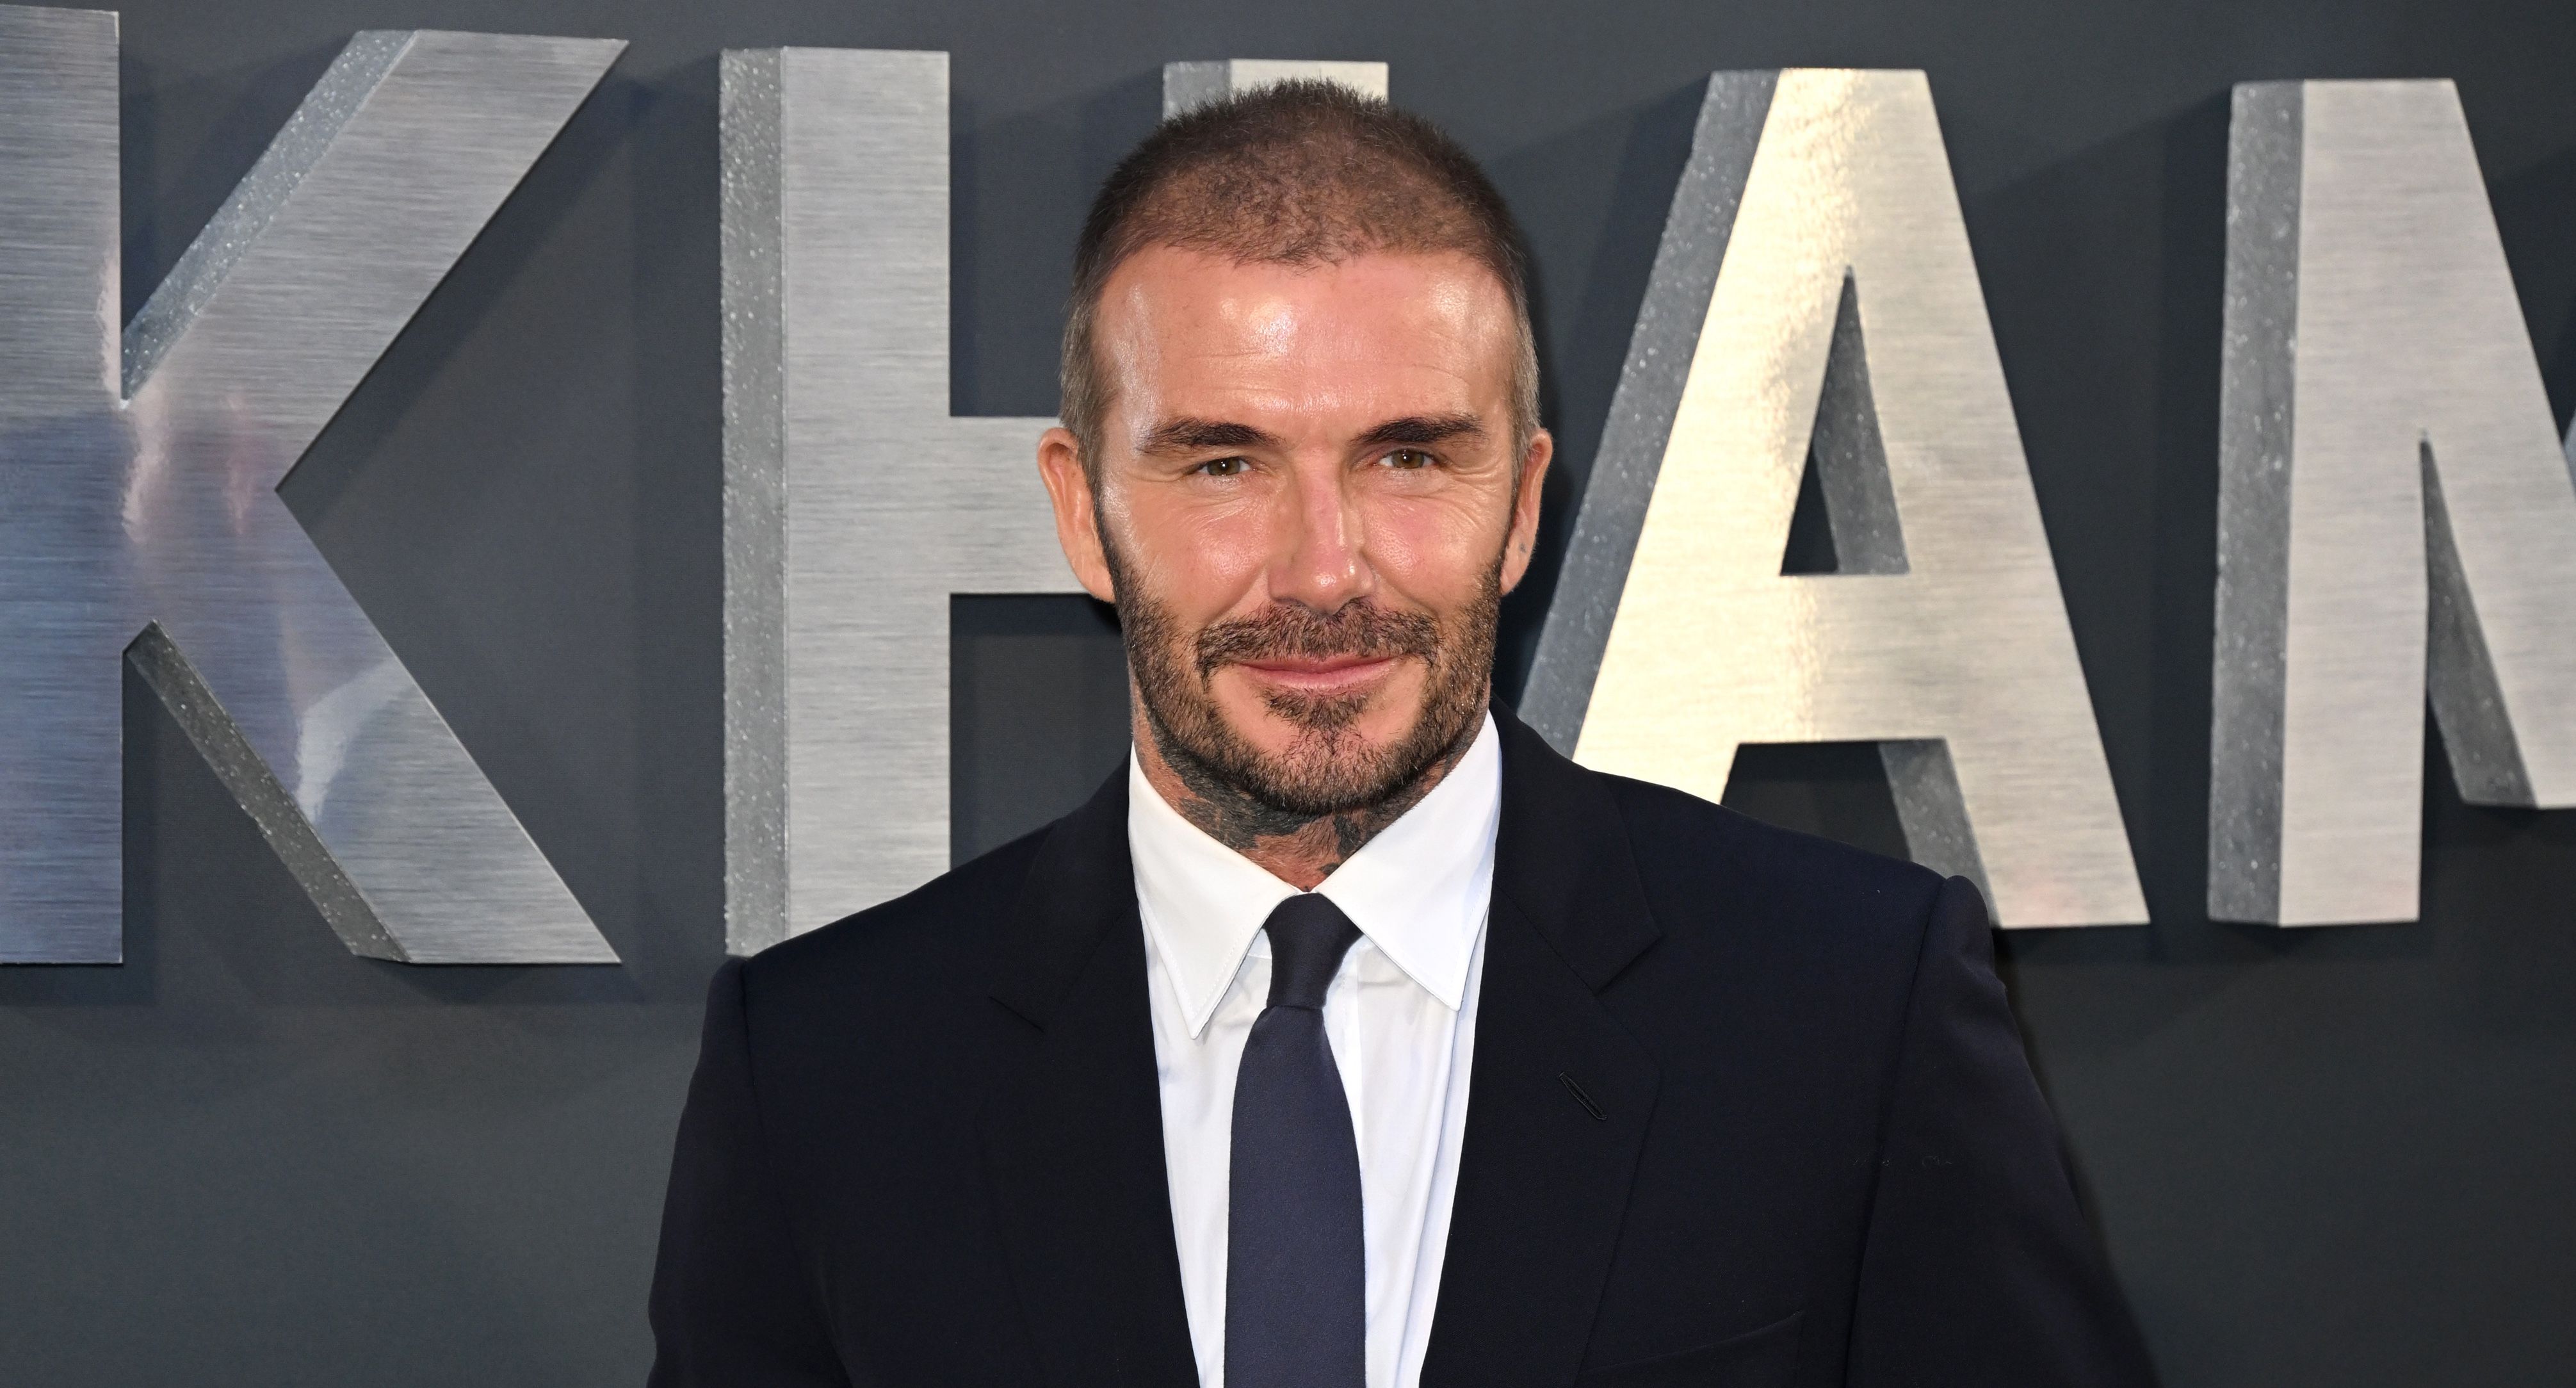 Why did David Beckham shave his head recently?